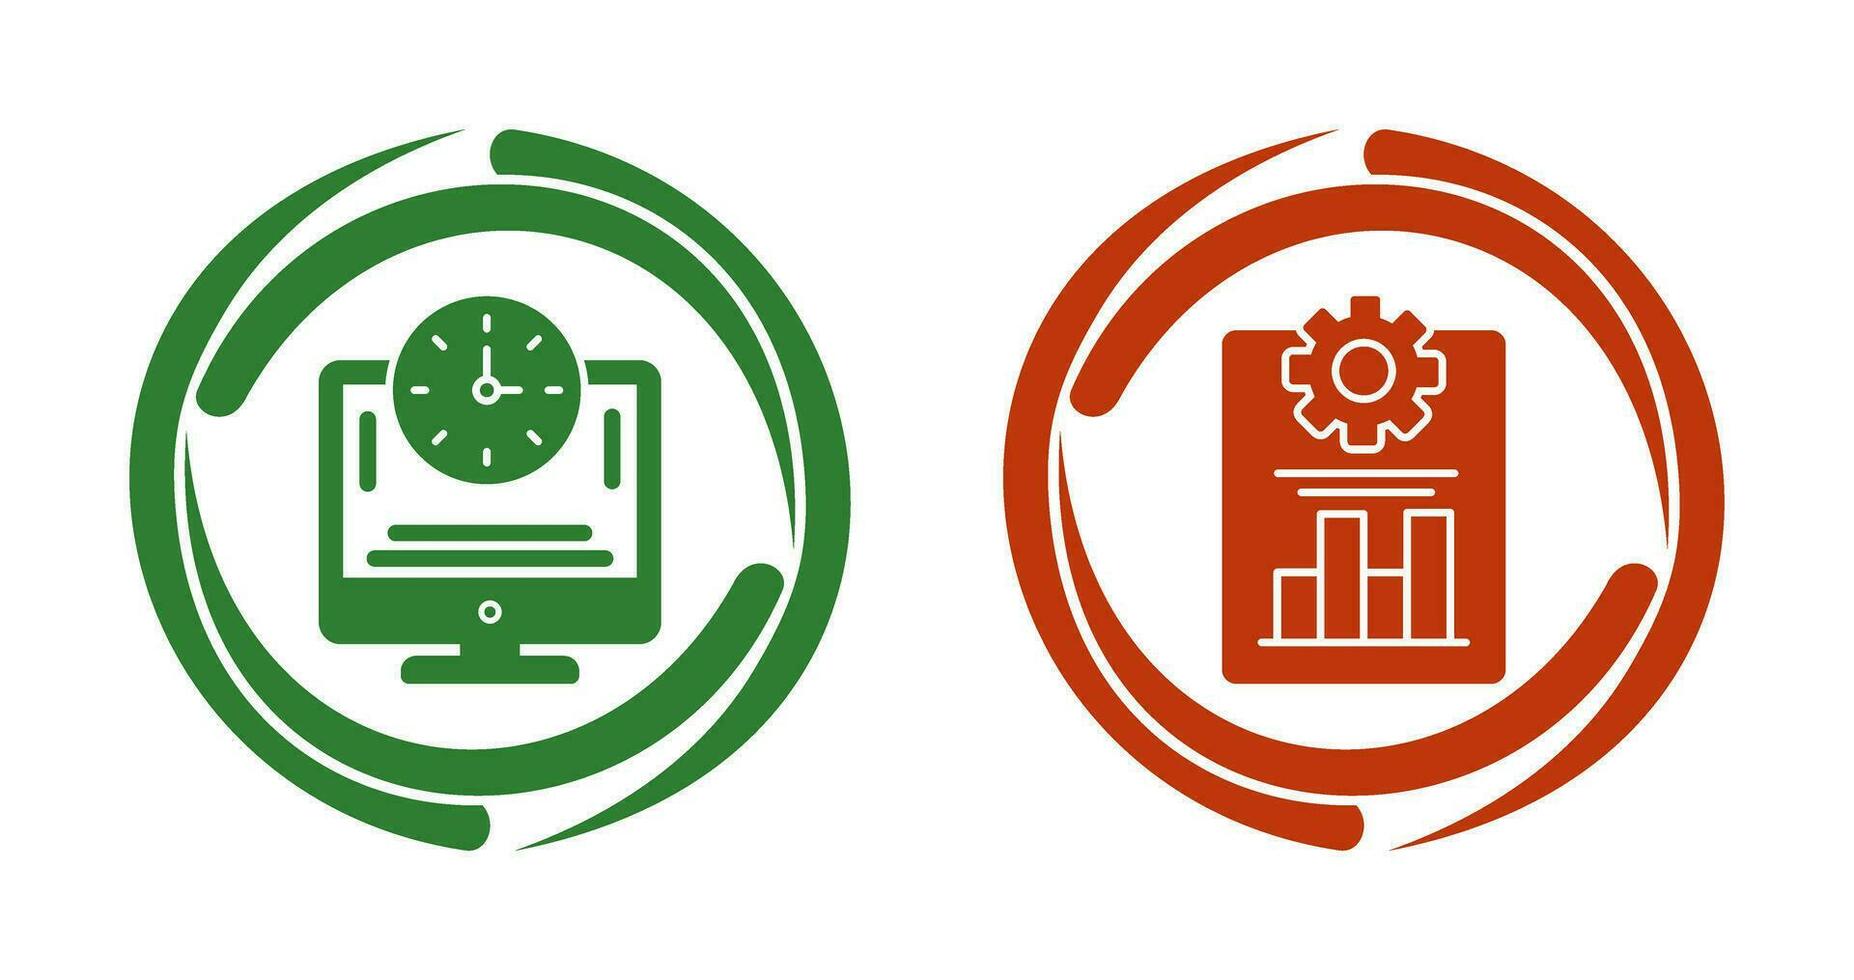 Productivity and Online Time Icon vector